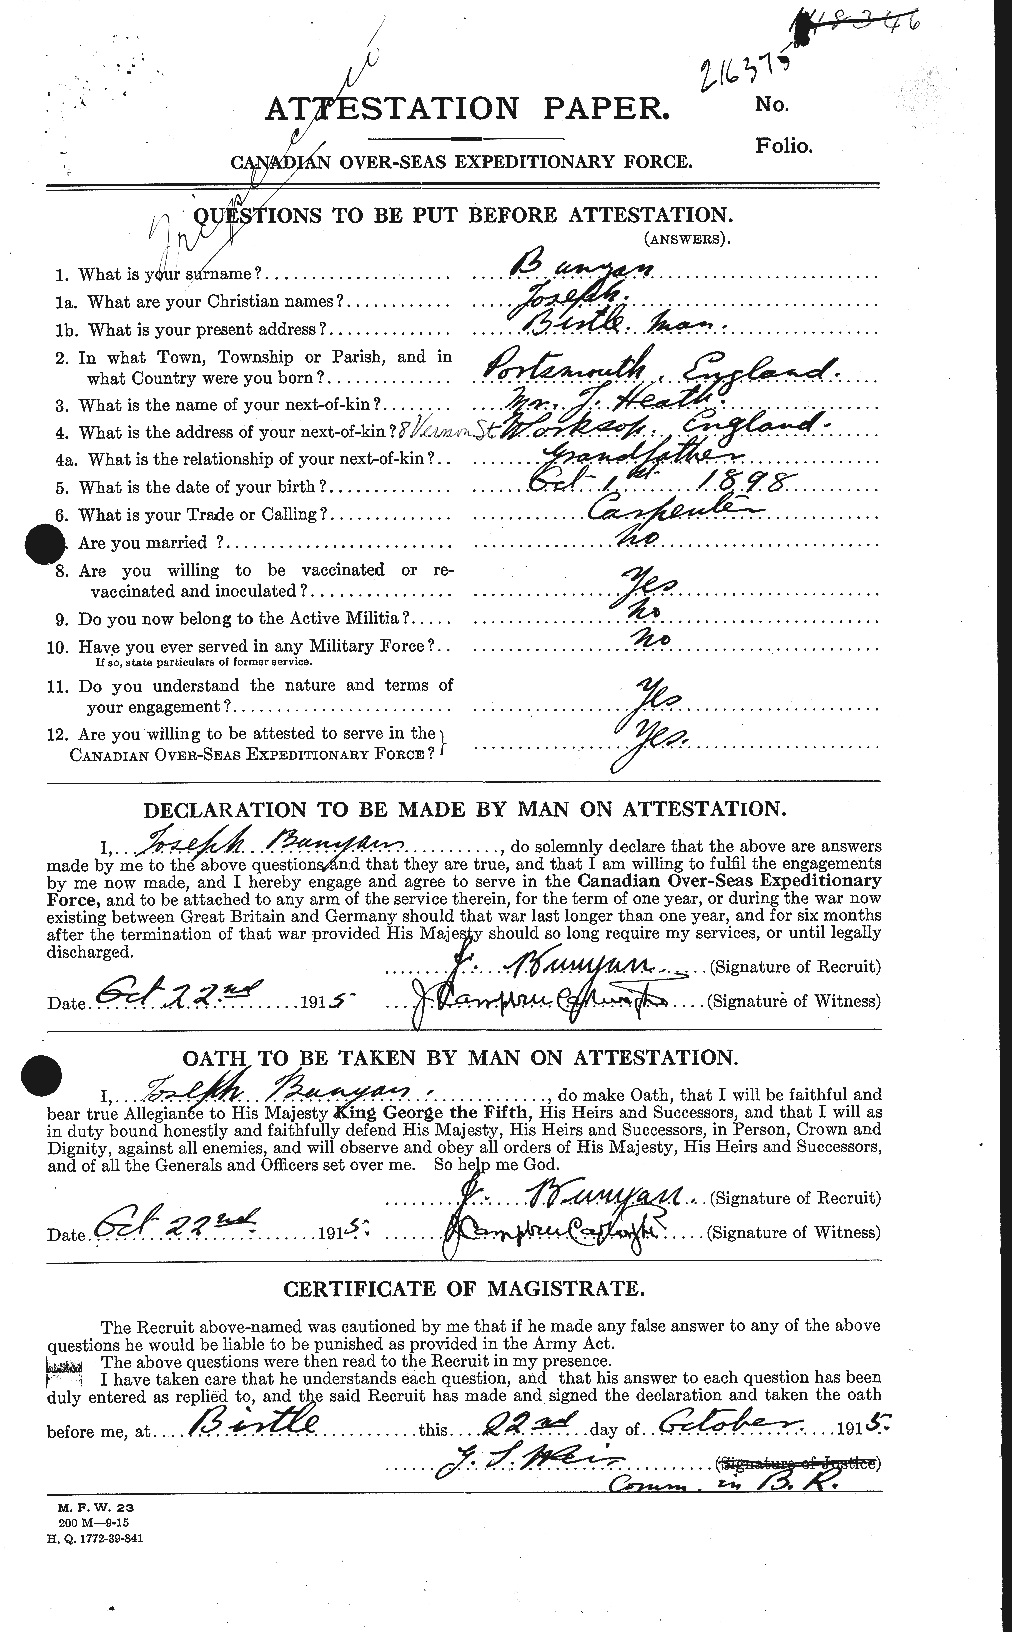 Personnel Records of the First World War - CEF 270994a